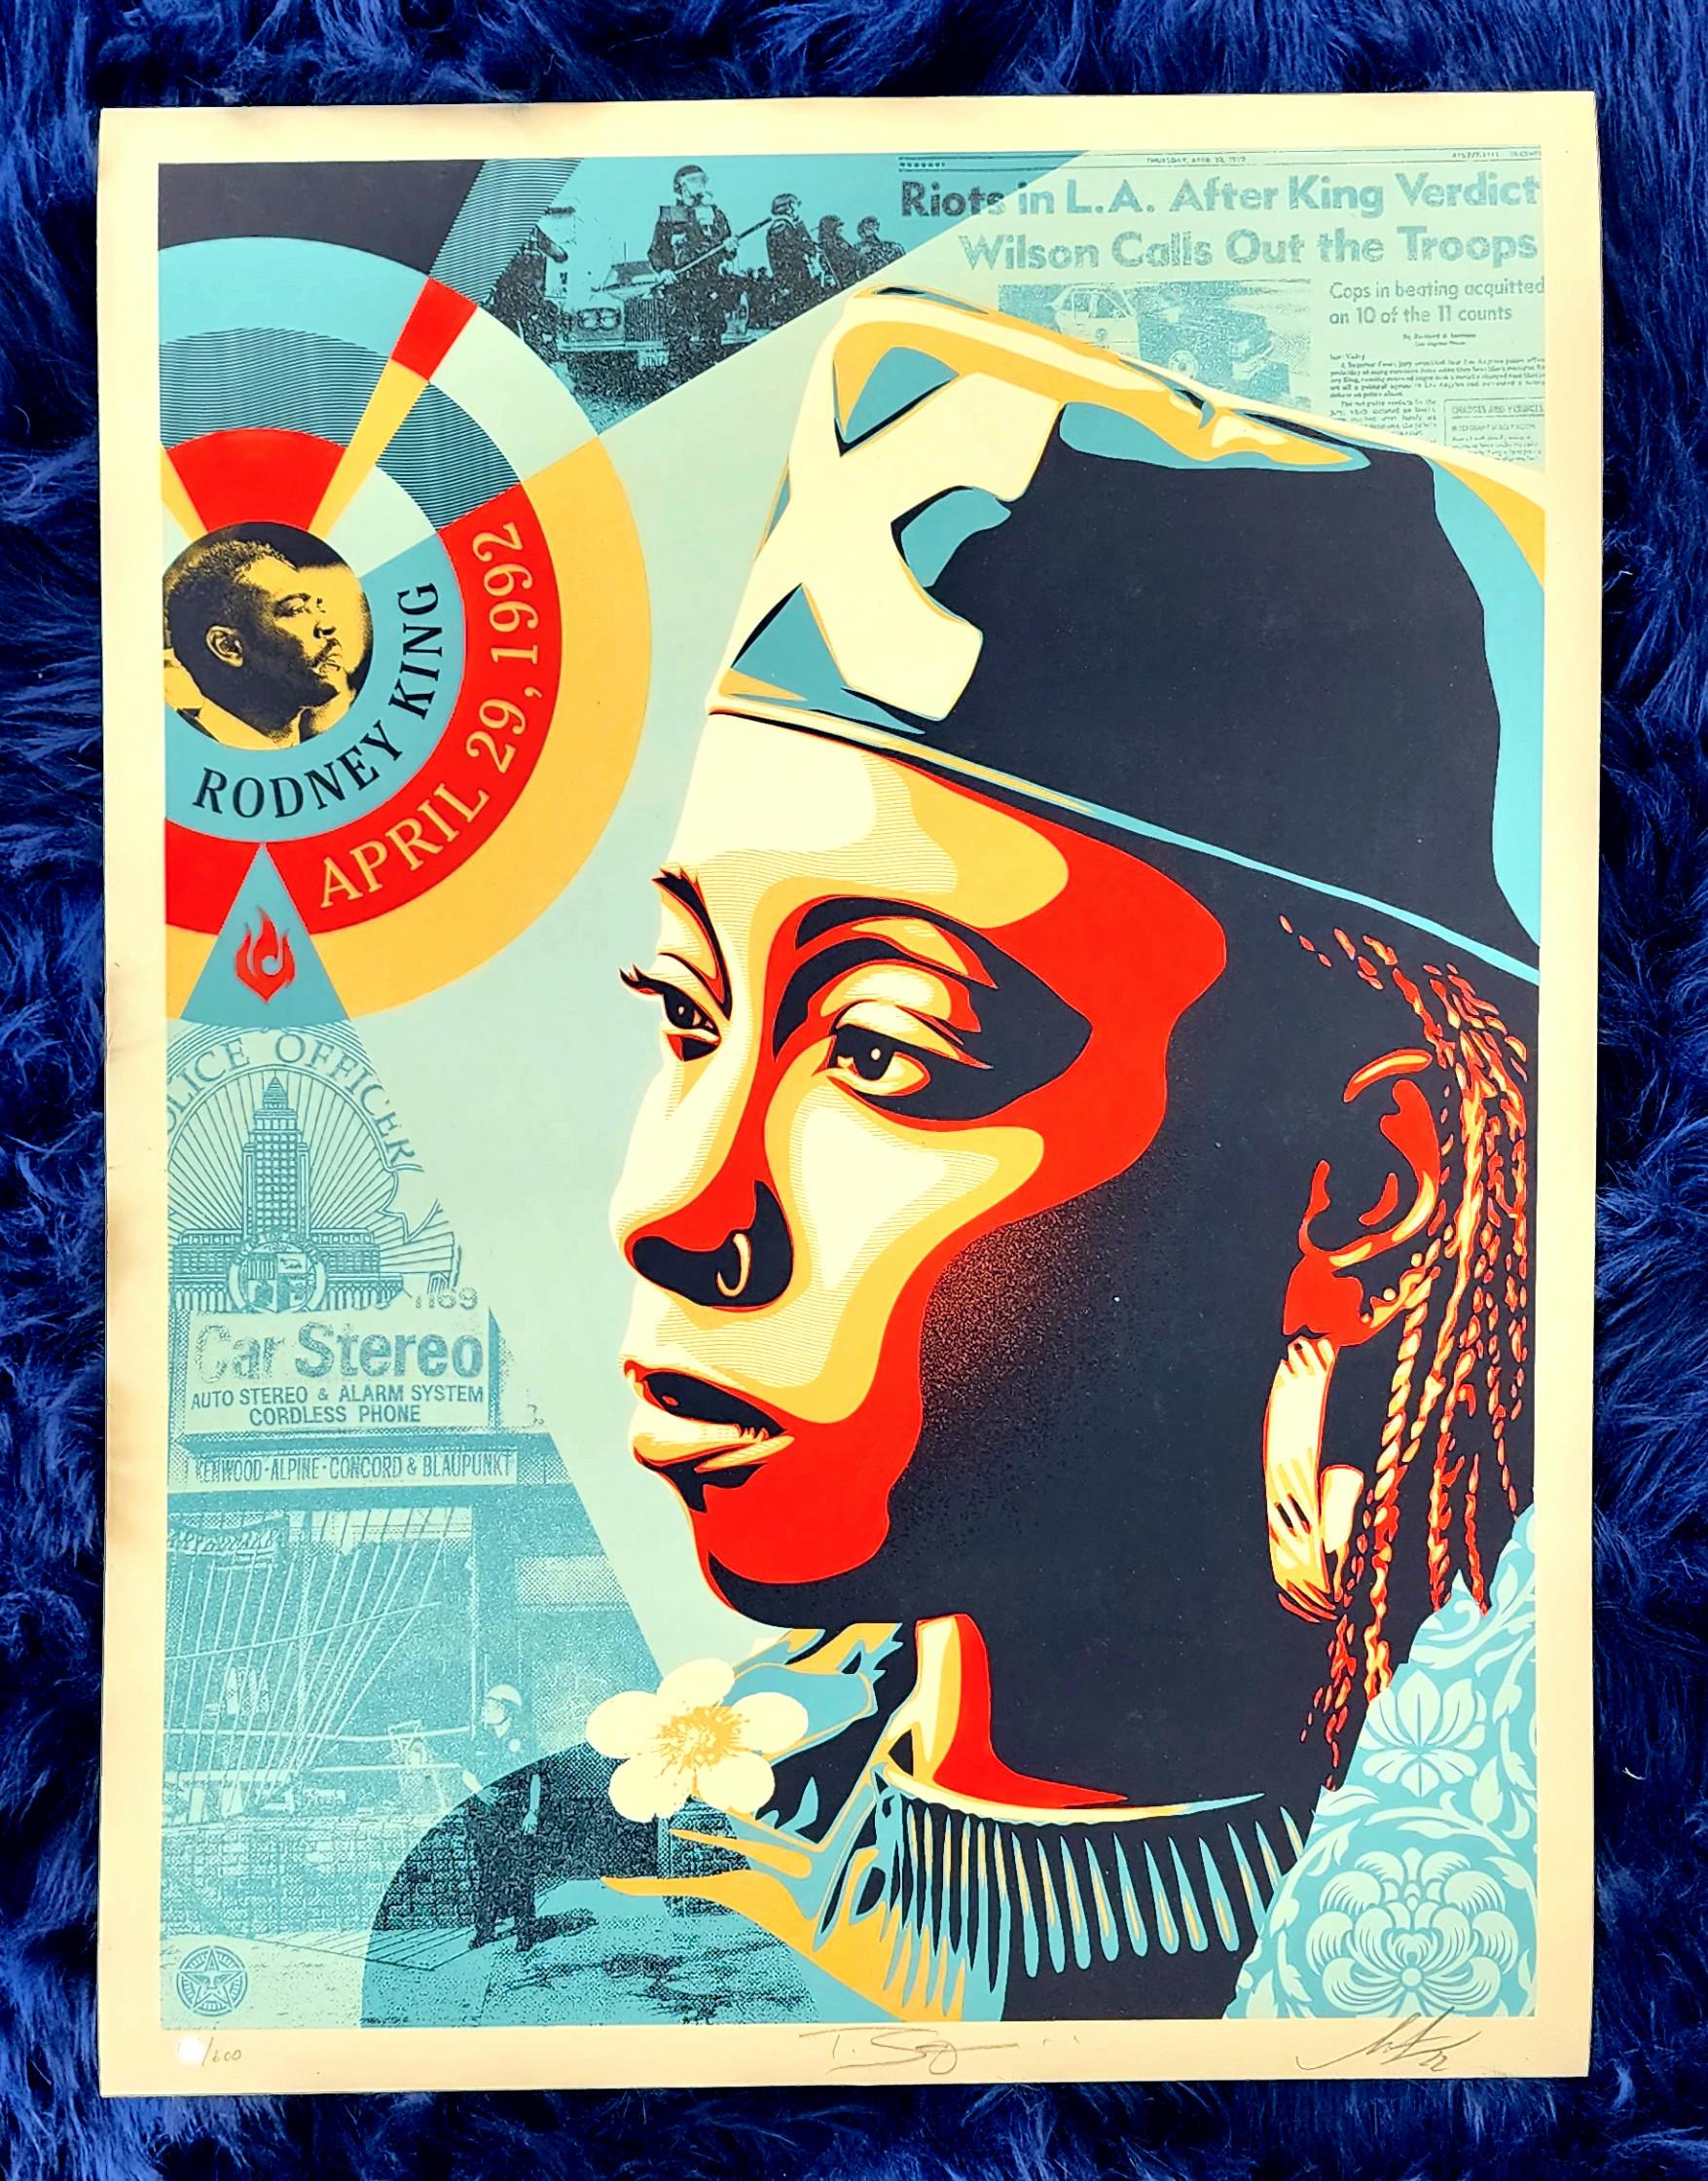 Eyes On The King Verdict - Contemporary Print by Shepard Fairey